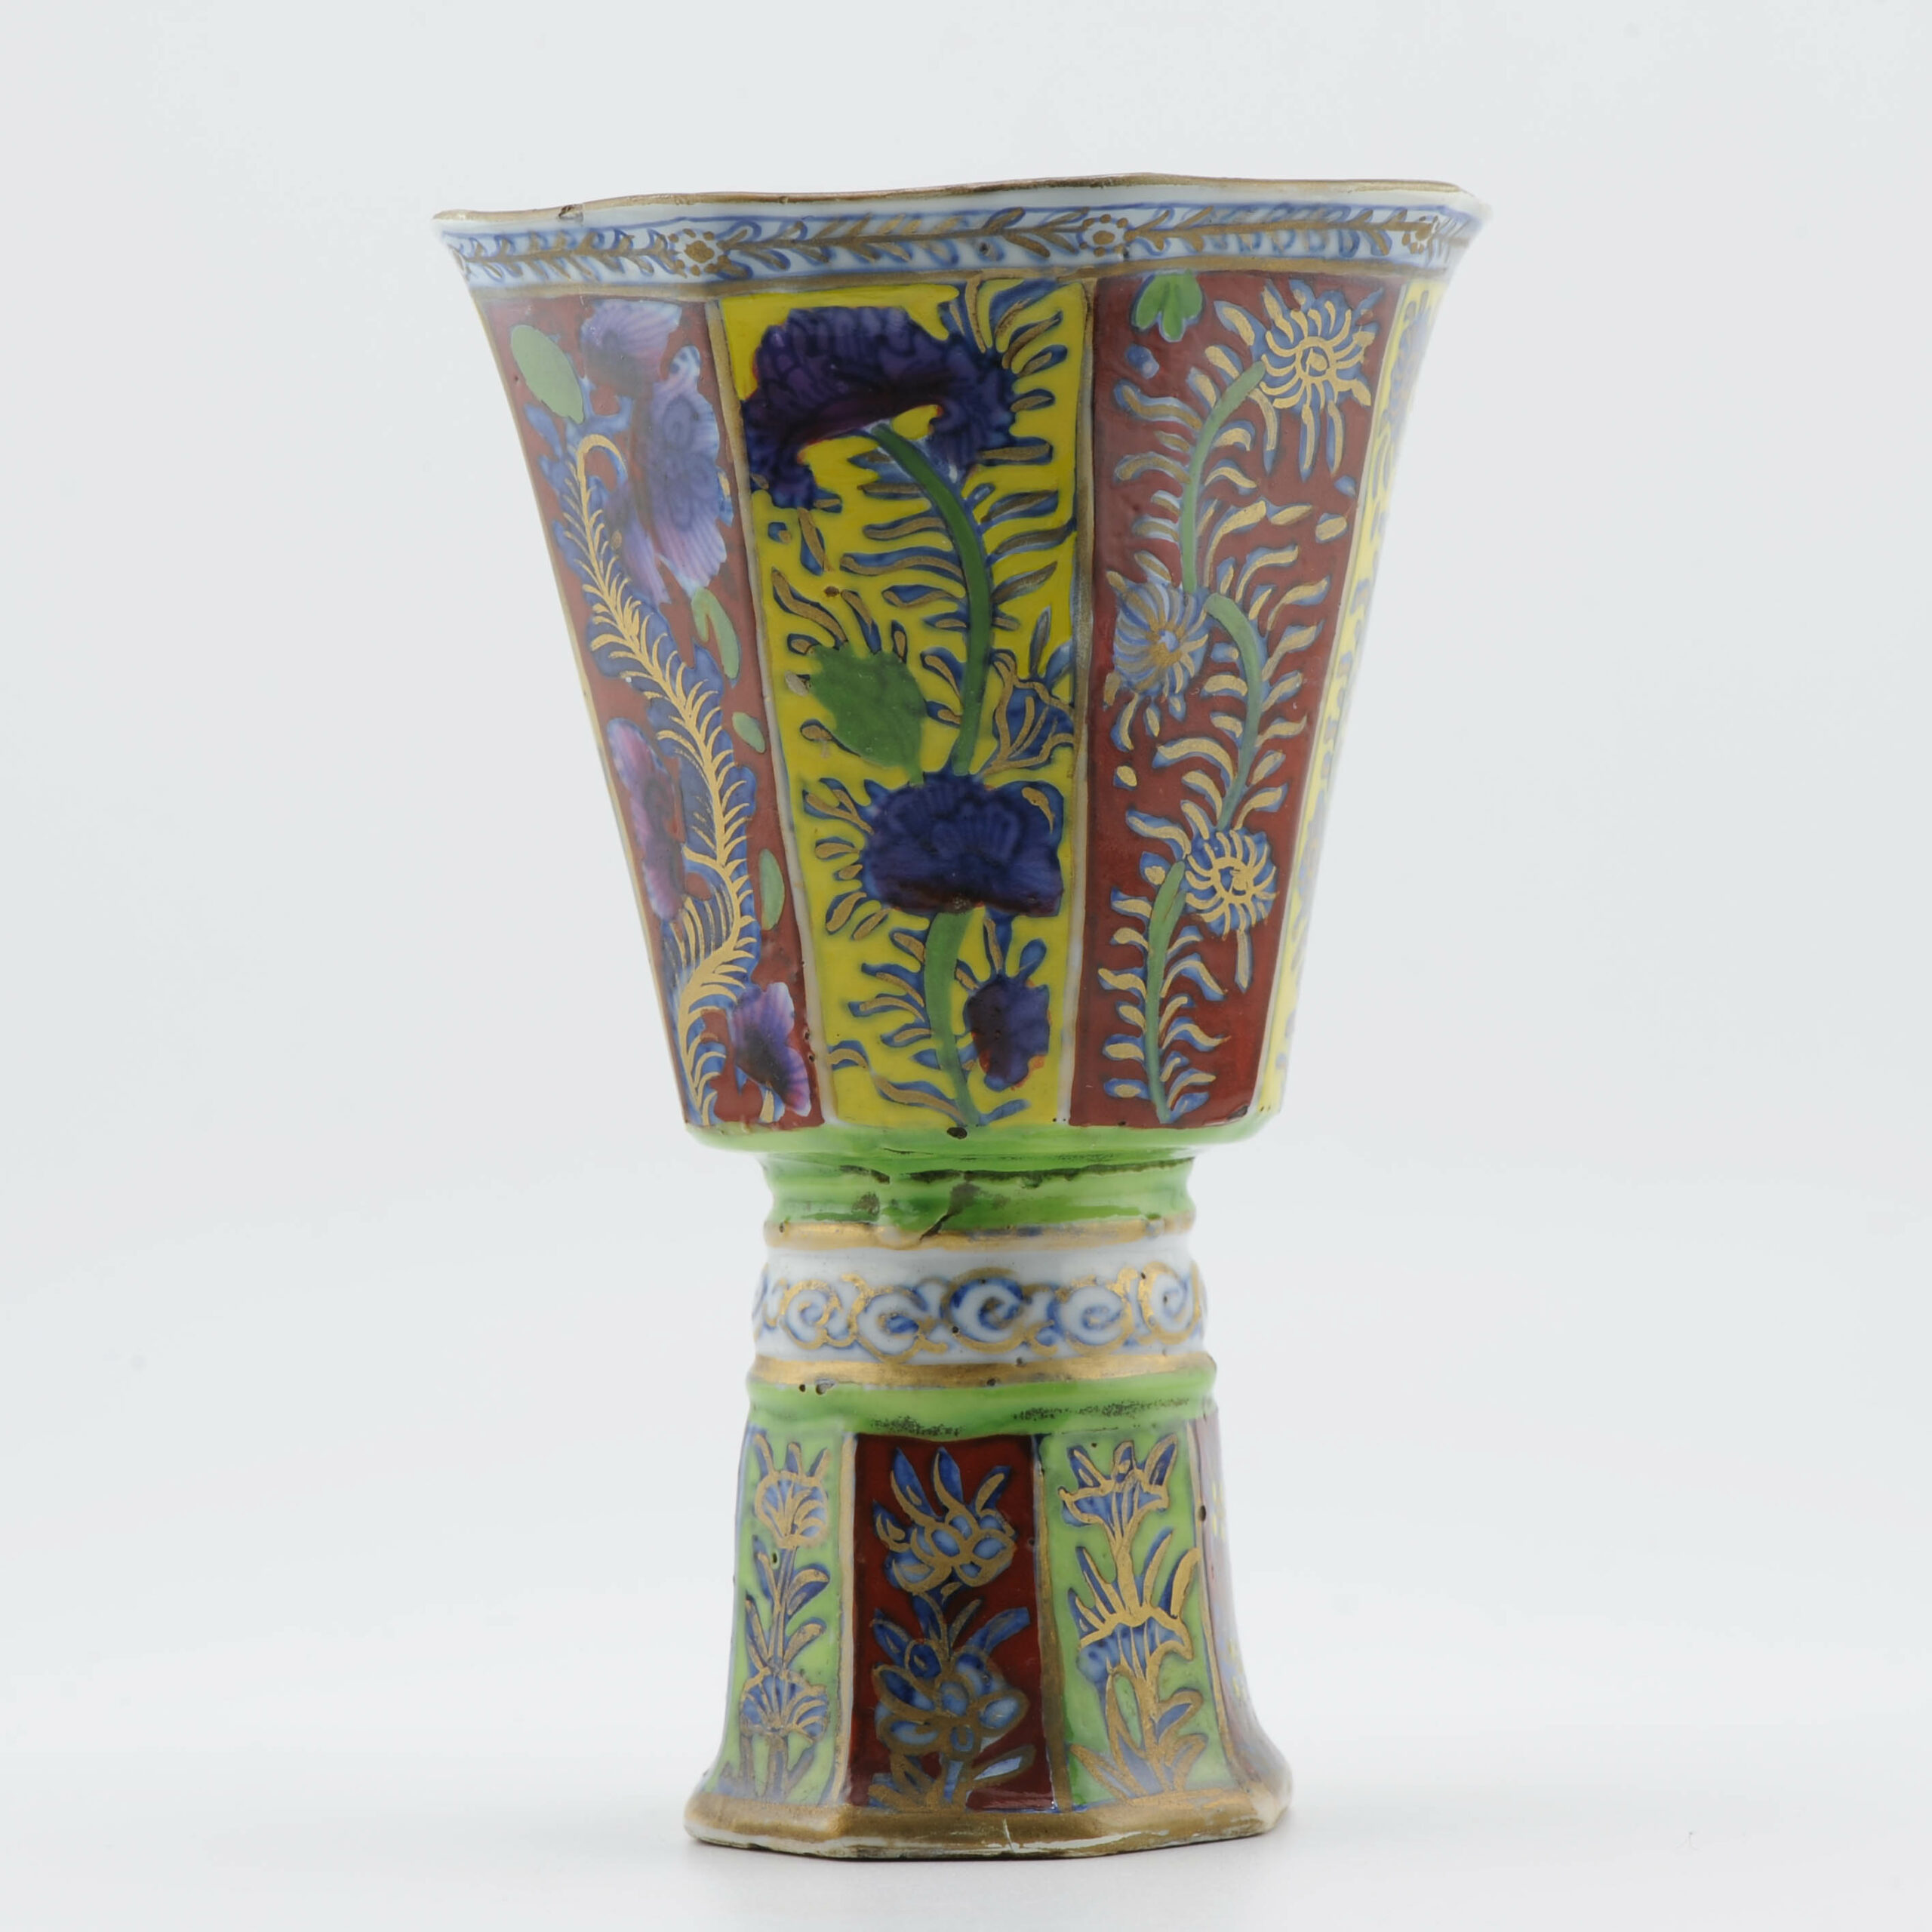 1344 Antique Ca 1700 Kangxi Stemcup. Redecorated in the UK around 1780-1820